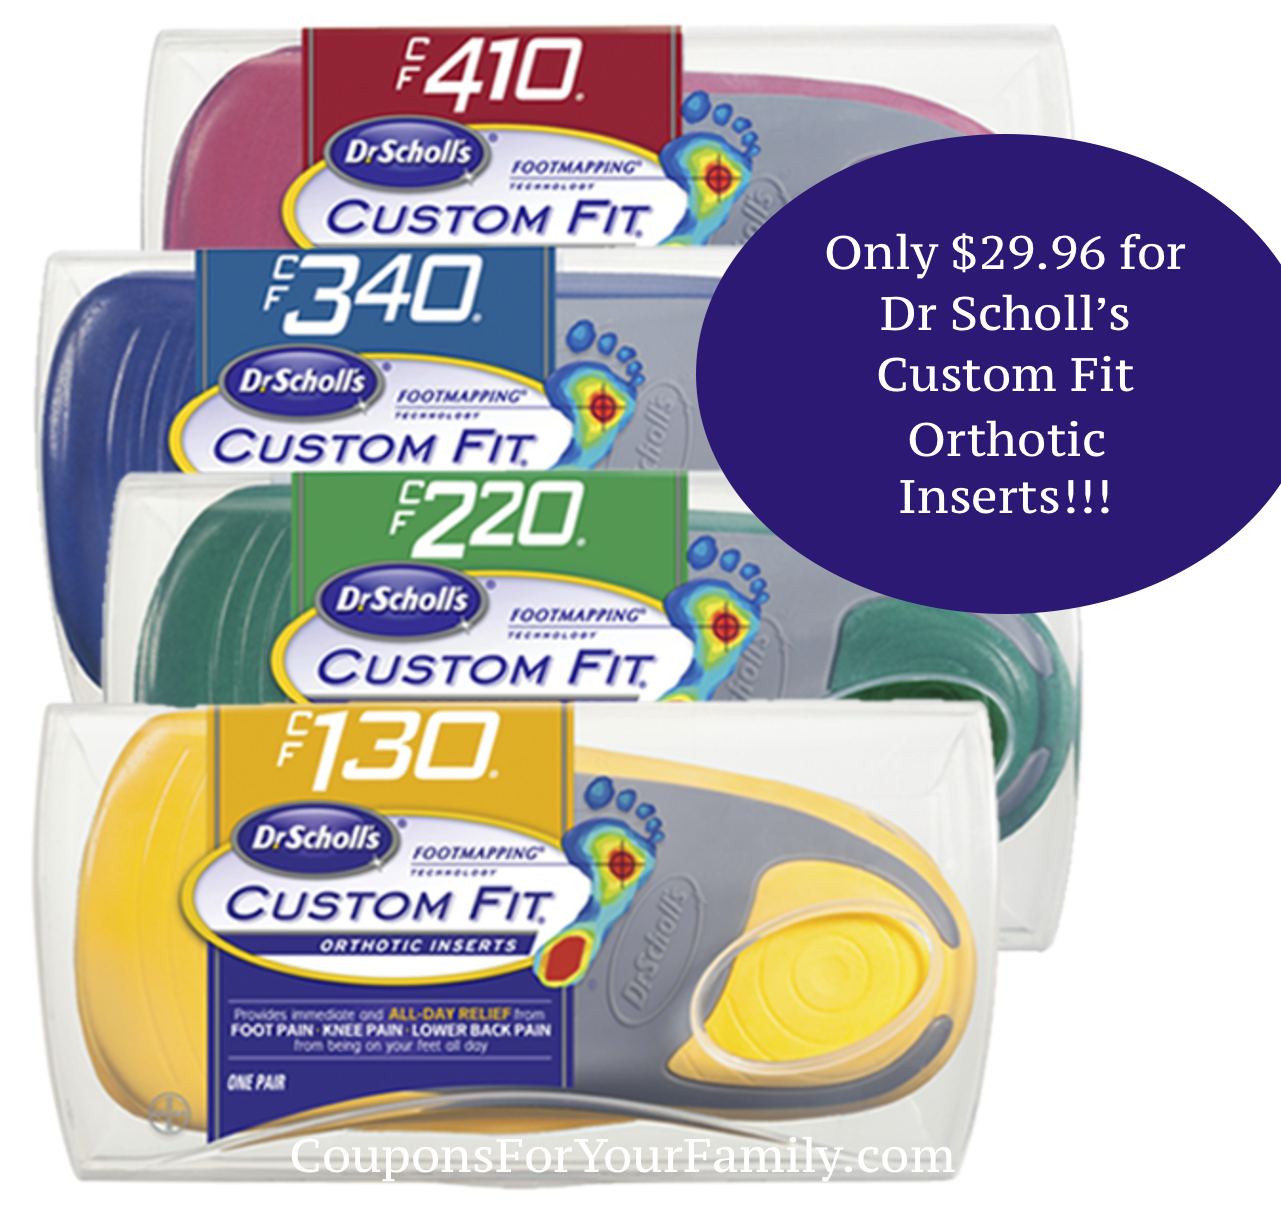 Get Dr Scholls Custom Fit Foot Inserts for only $29.96 {Reg $49.96} at Walmart!!